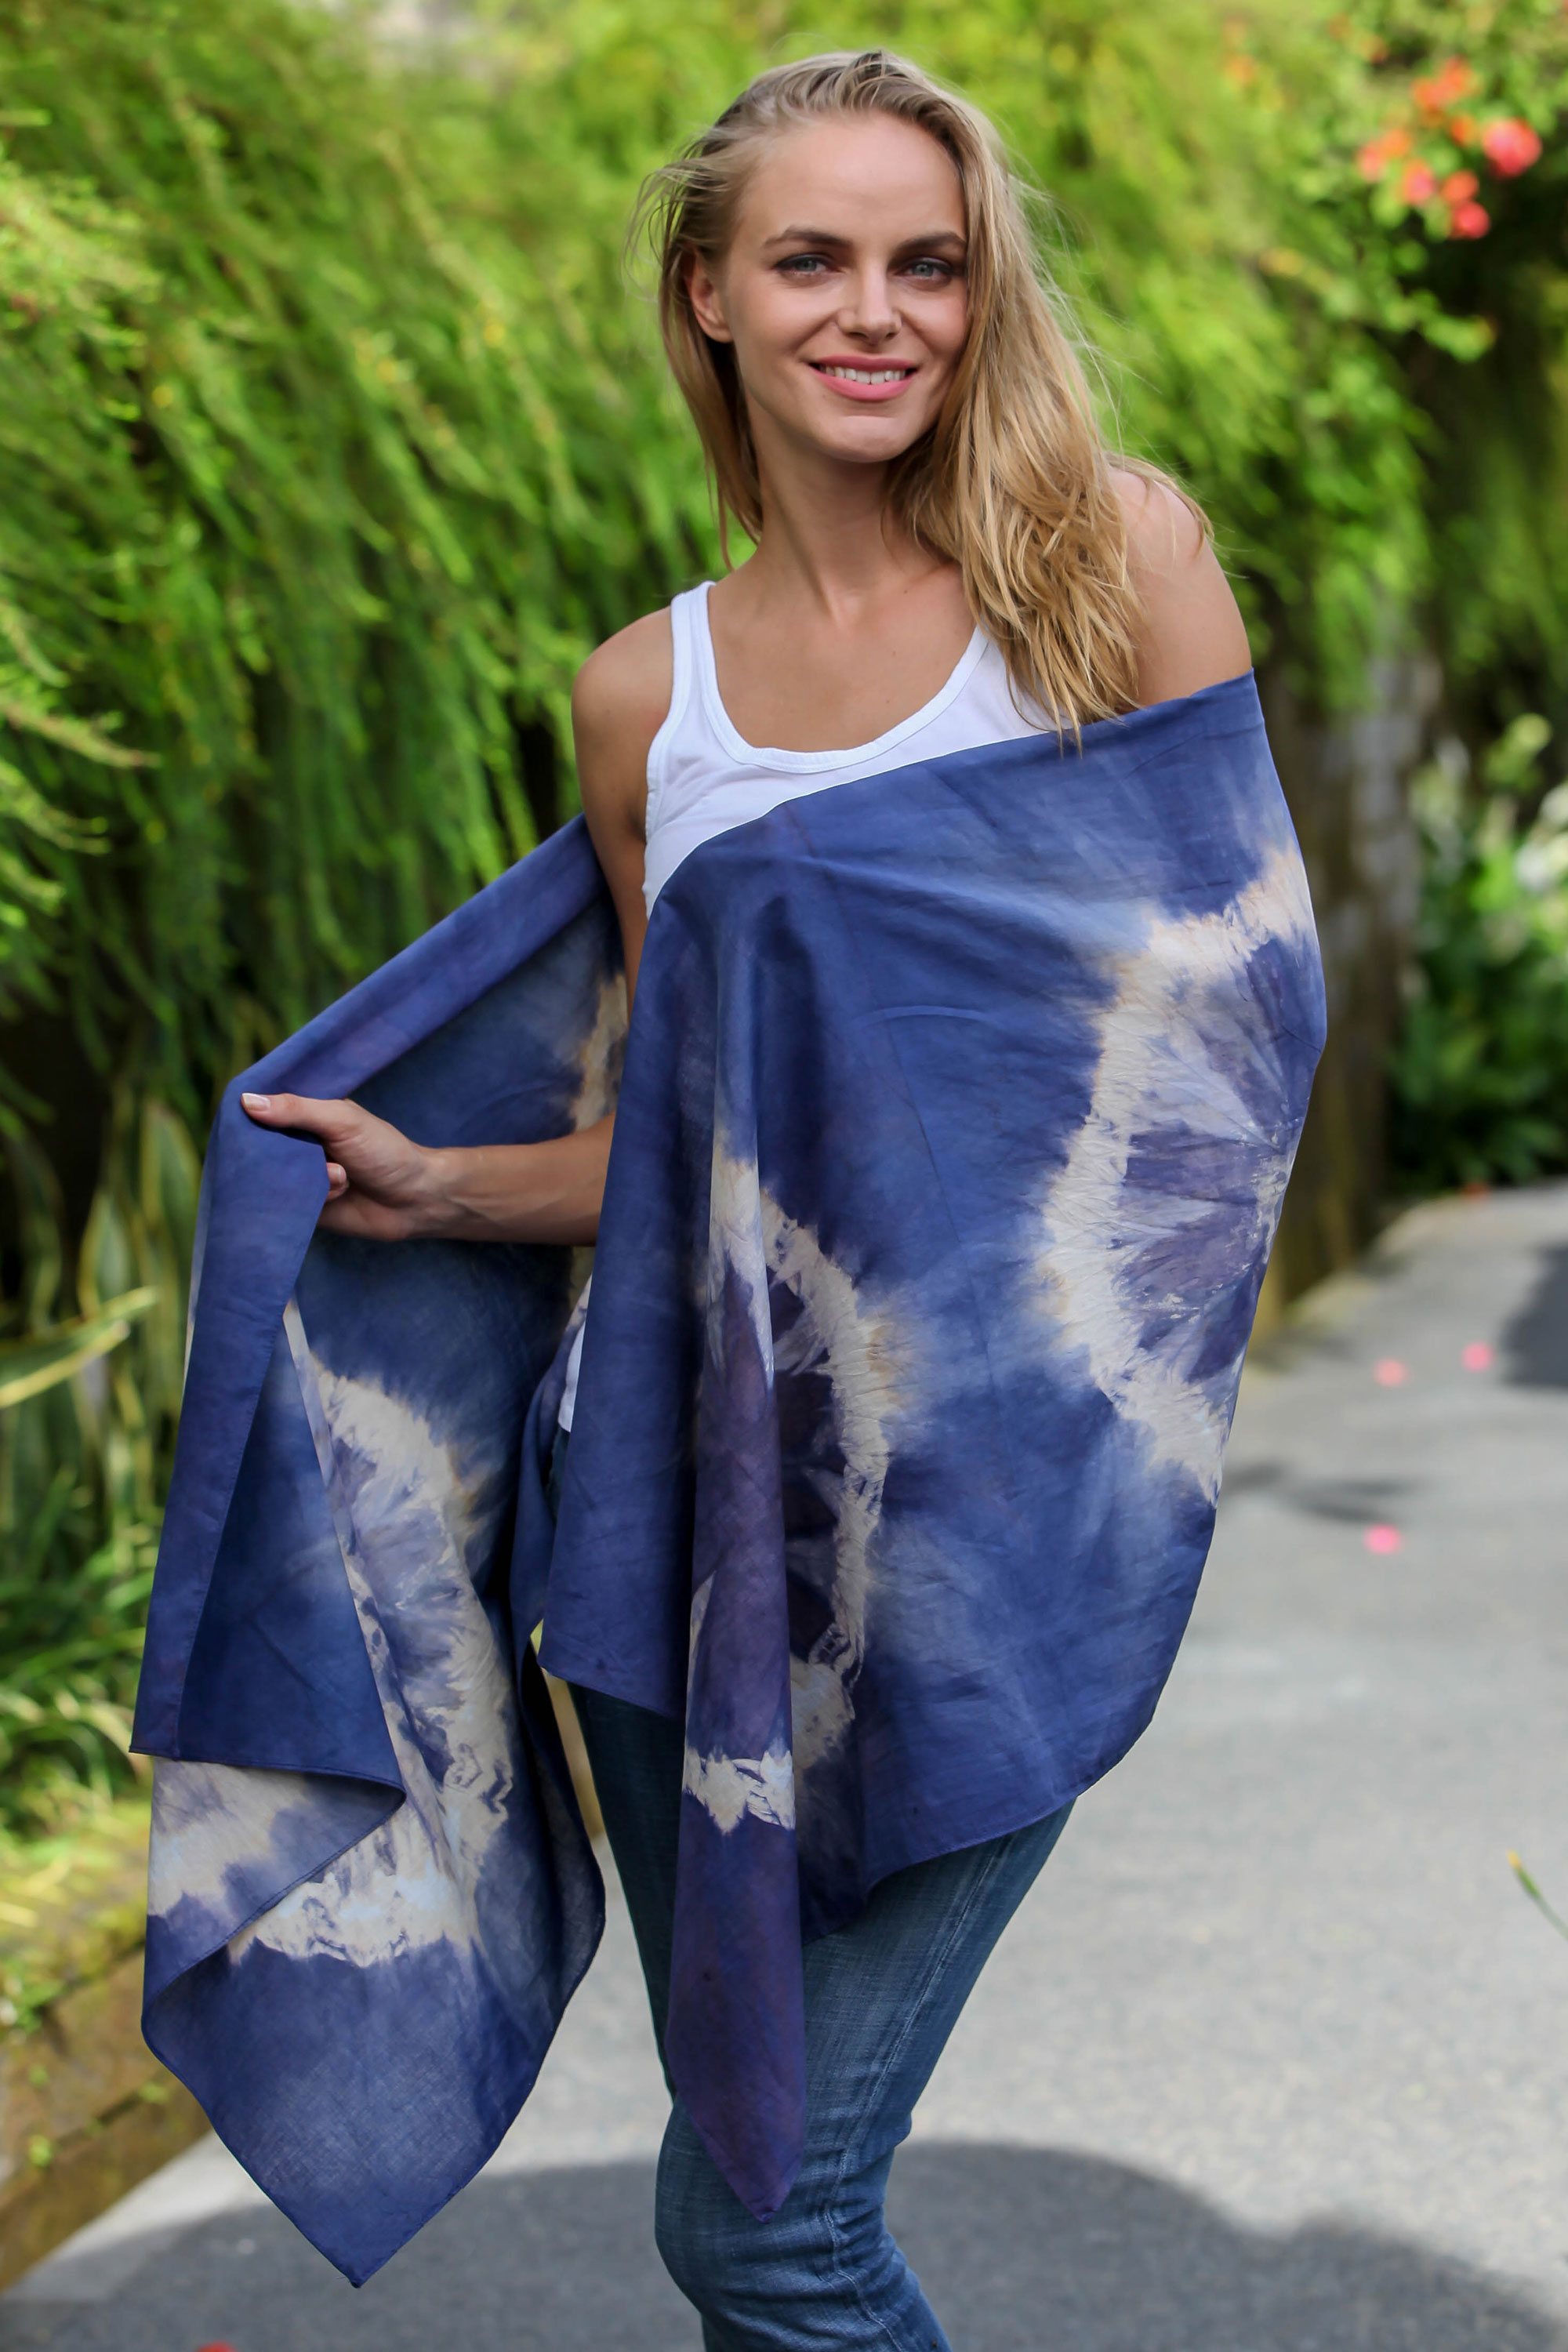 Try These Perfect Scarves and Shawls for Warm Weather